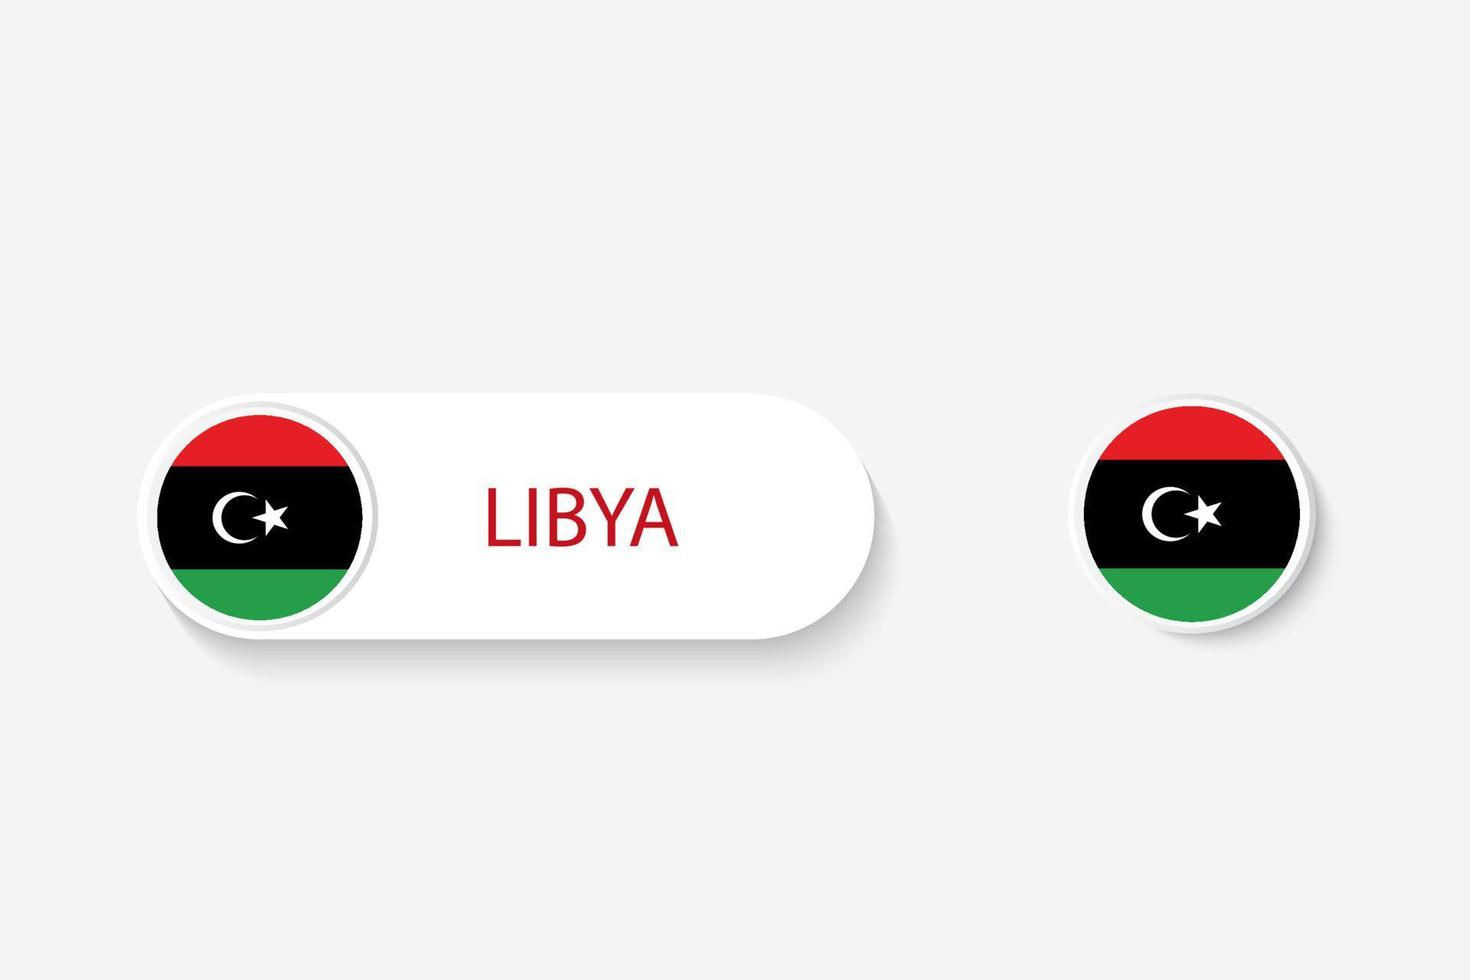 Libya button flag in illustration of oval shaped with word of Libya. And button flag Libya. vector